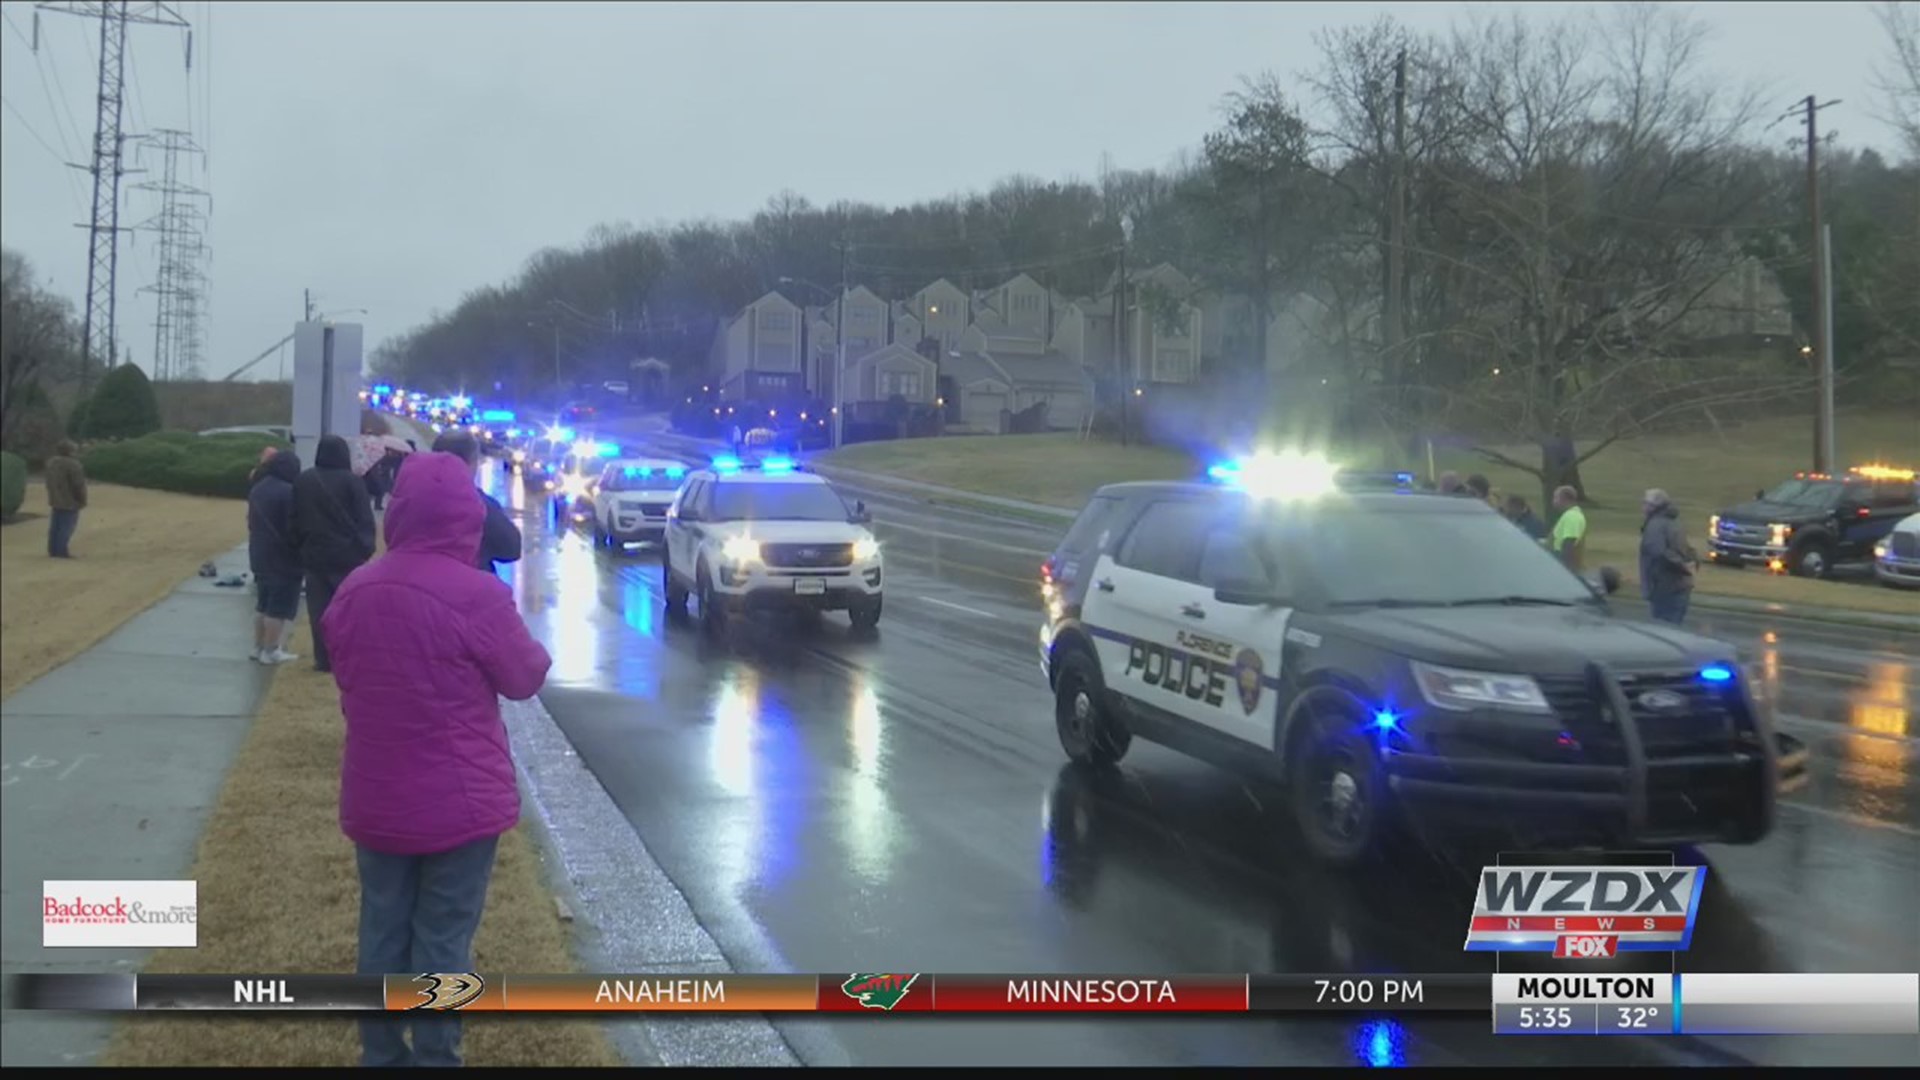 Officer Billy Clardy III was laid to rest today and locals lined the streets to say one last goodbye.